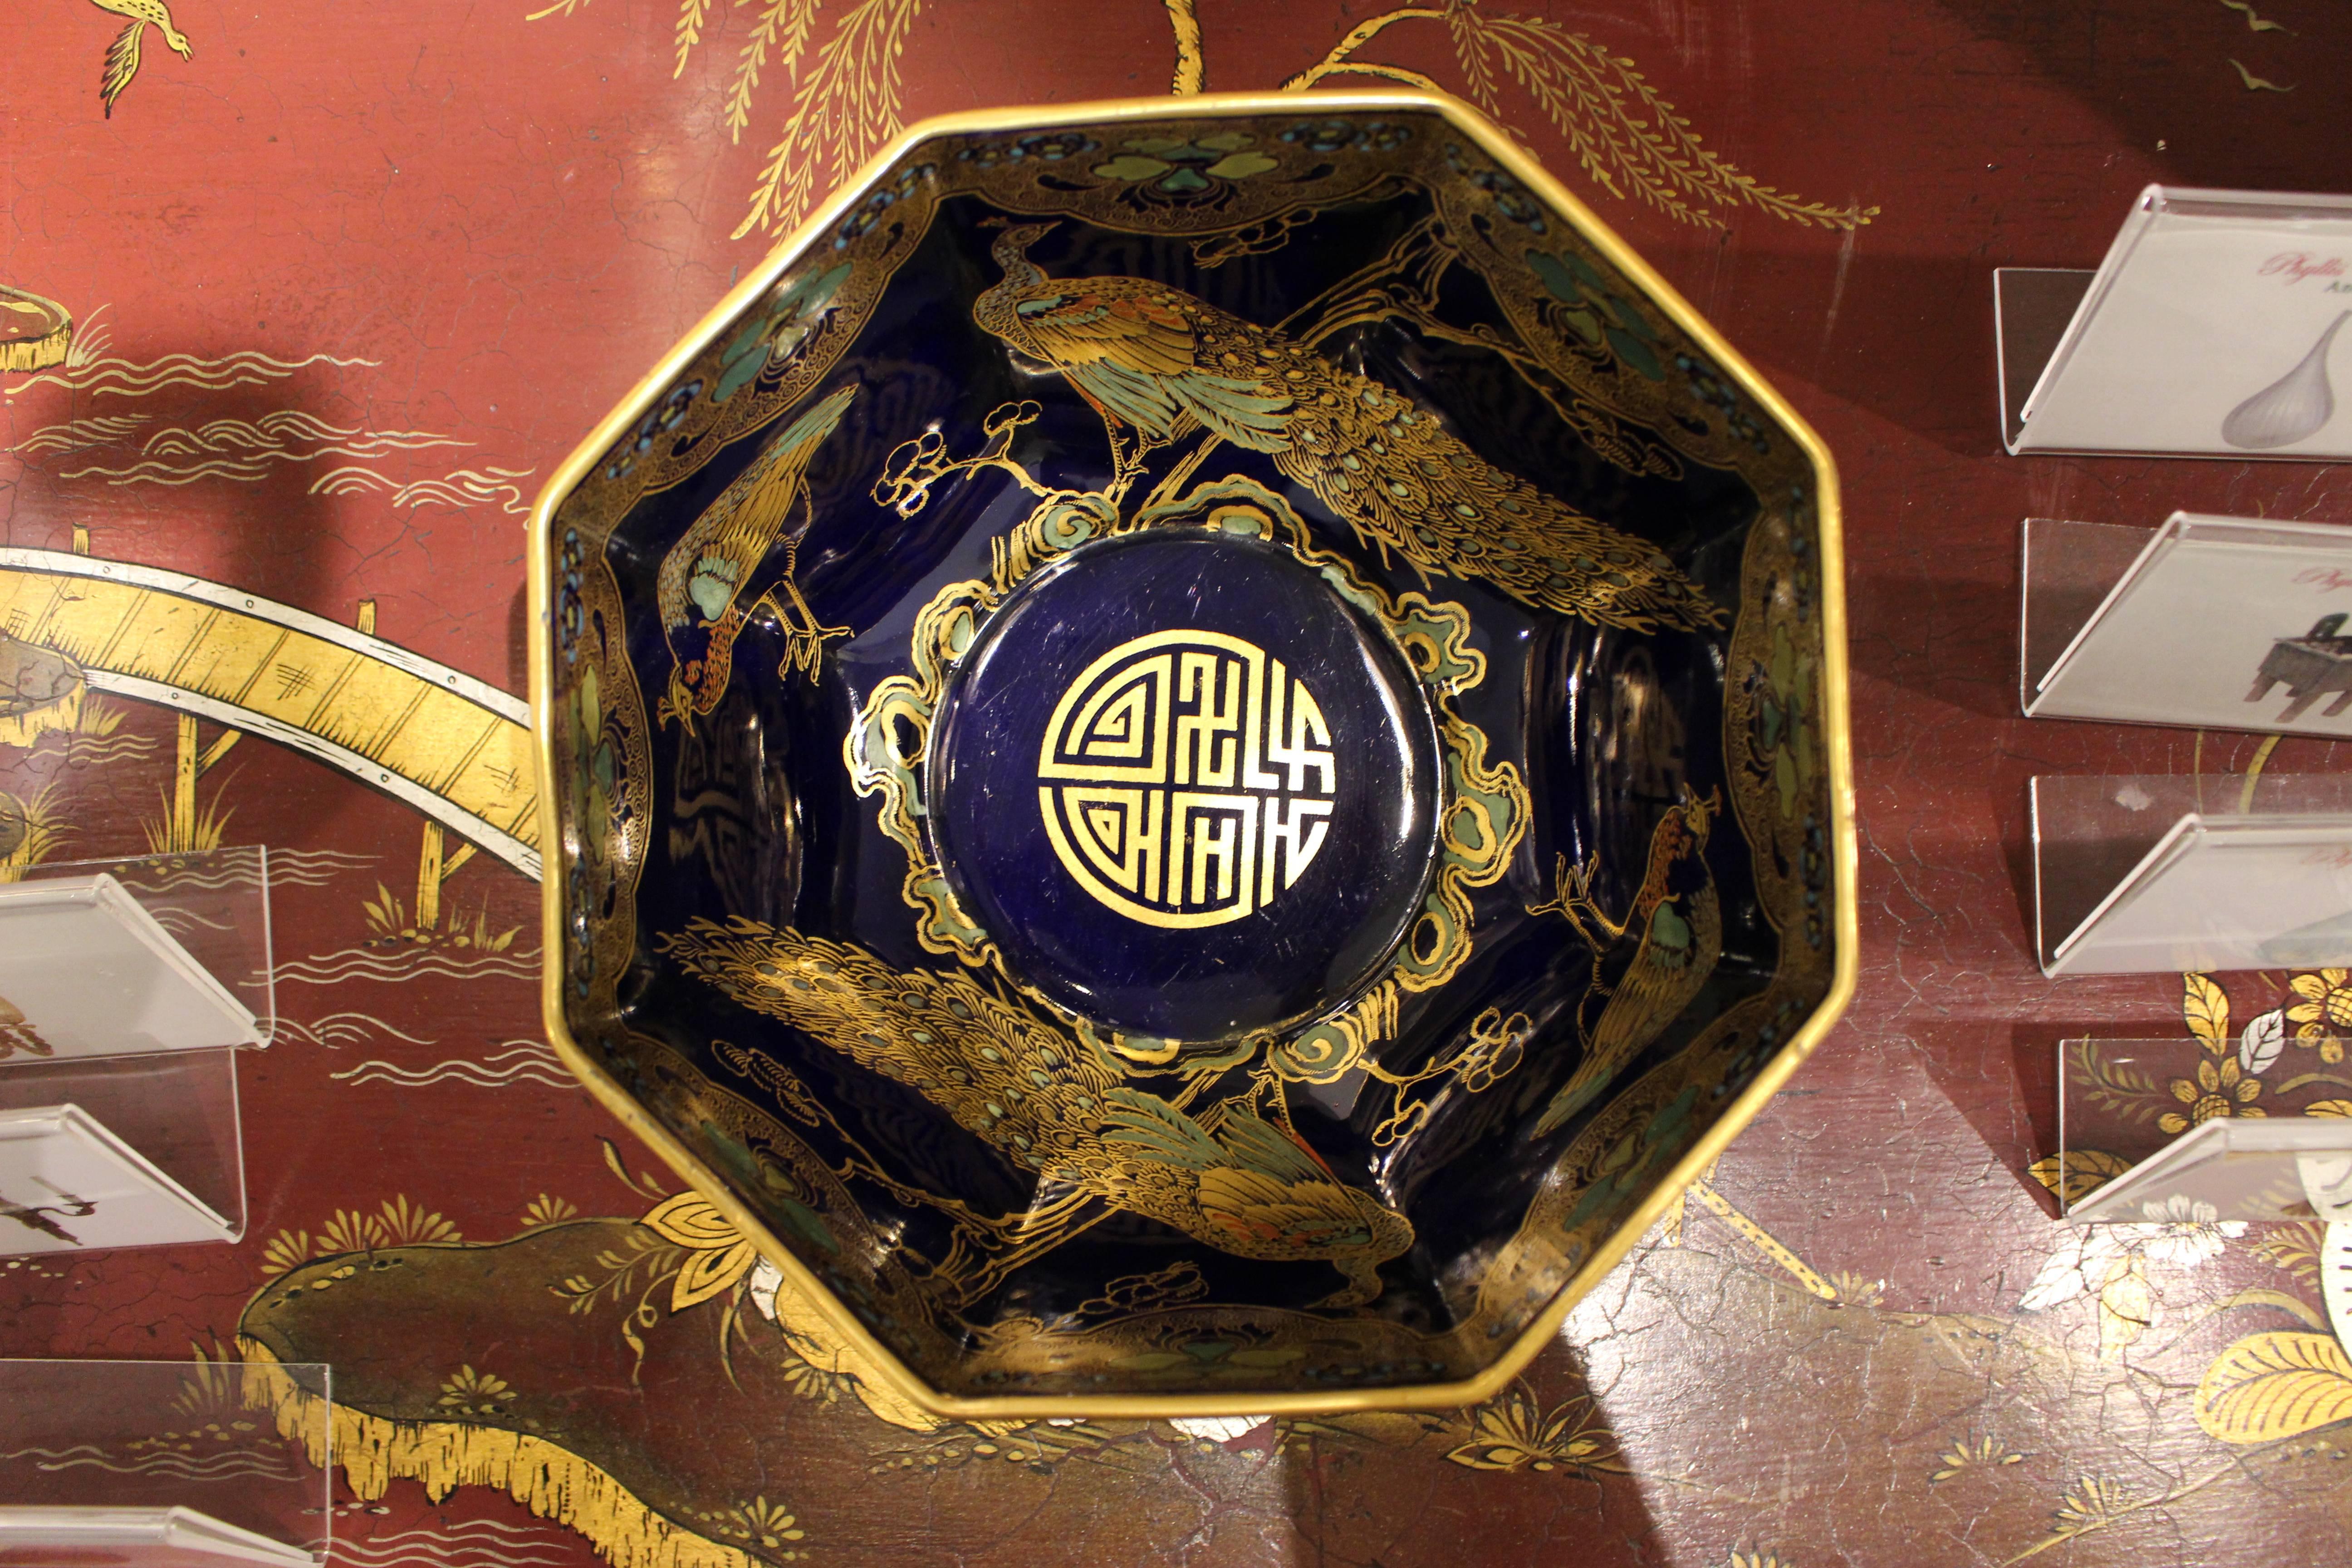 An elegant Mason’s ironstone Chinese style octagonal bowl decorated with delicate gilt and colored animal designs against a deep Mazarine-blue ground. A rich decoration animates the inside with a gilt rim and scallops enclosing stylized lotus flower